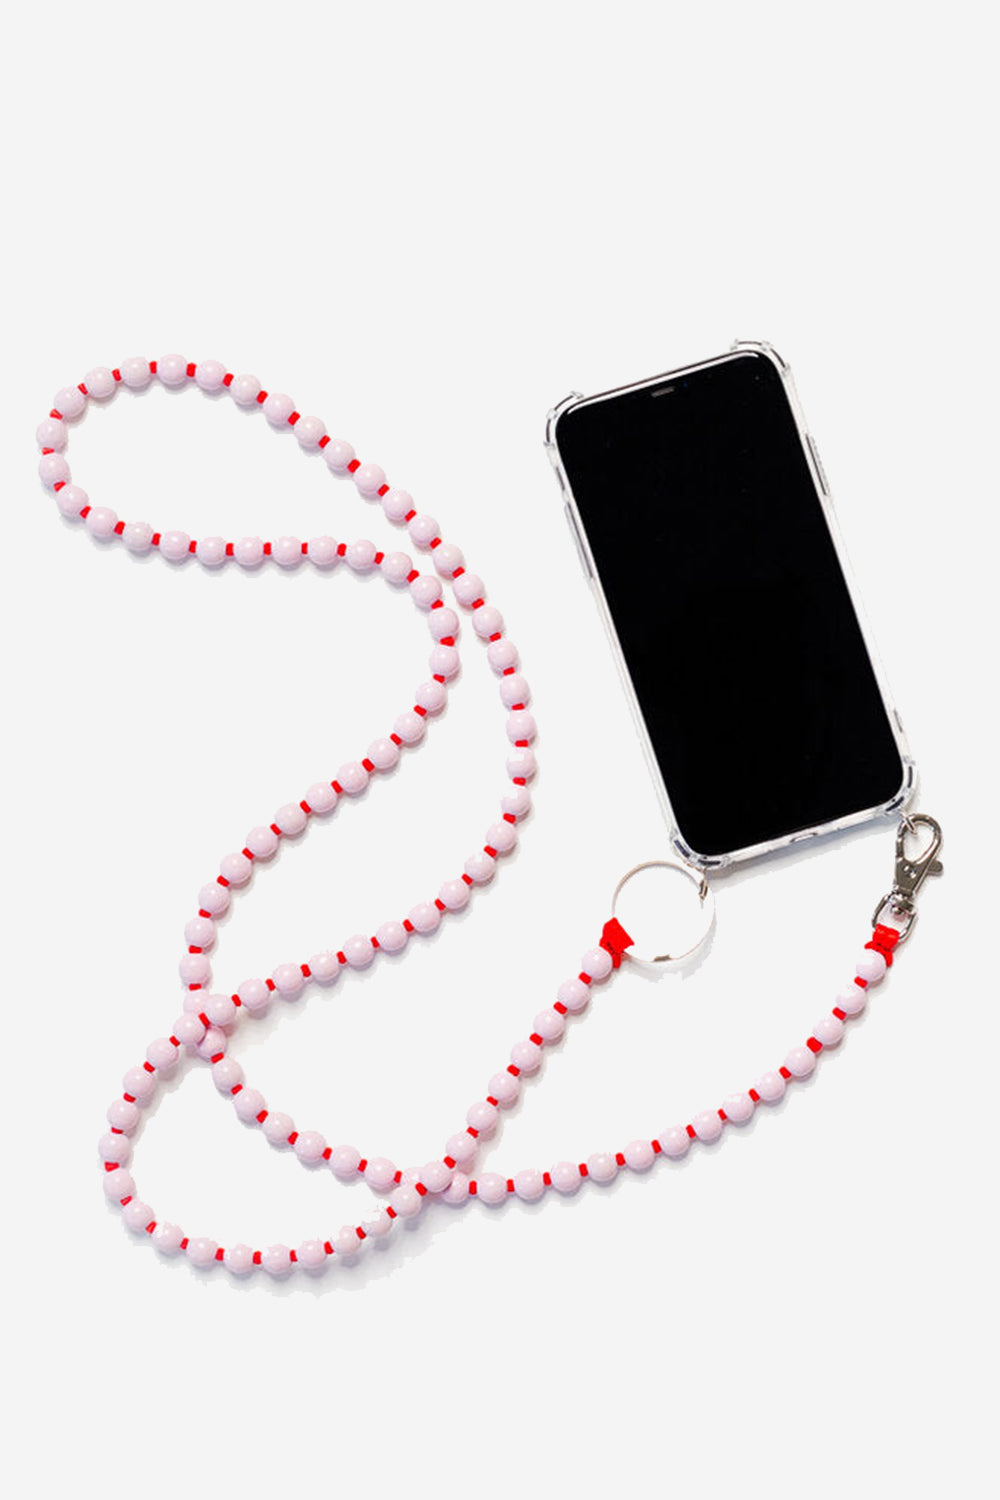 Phone Necklace, pastelrose/red